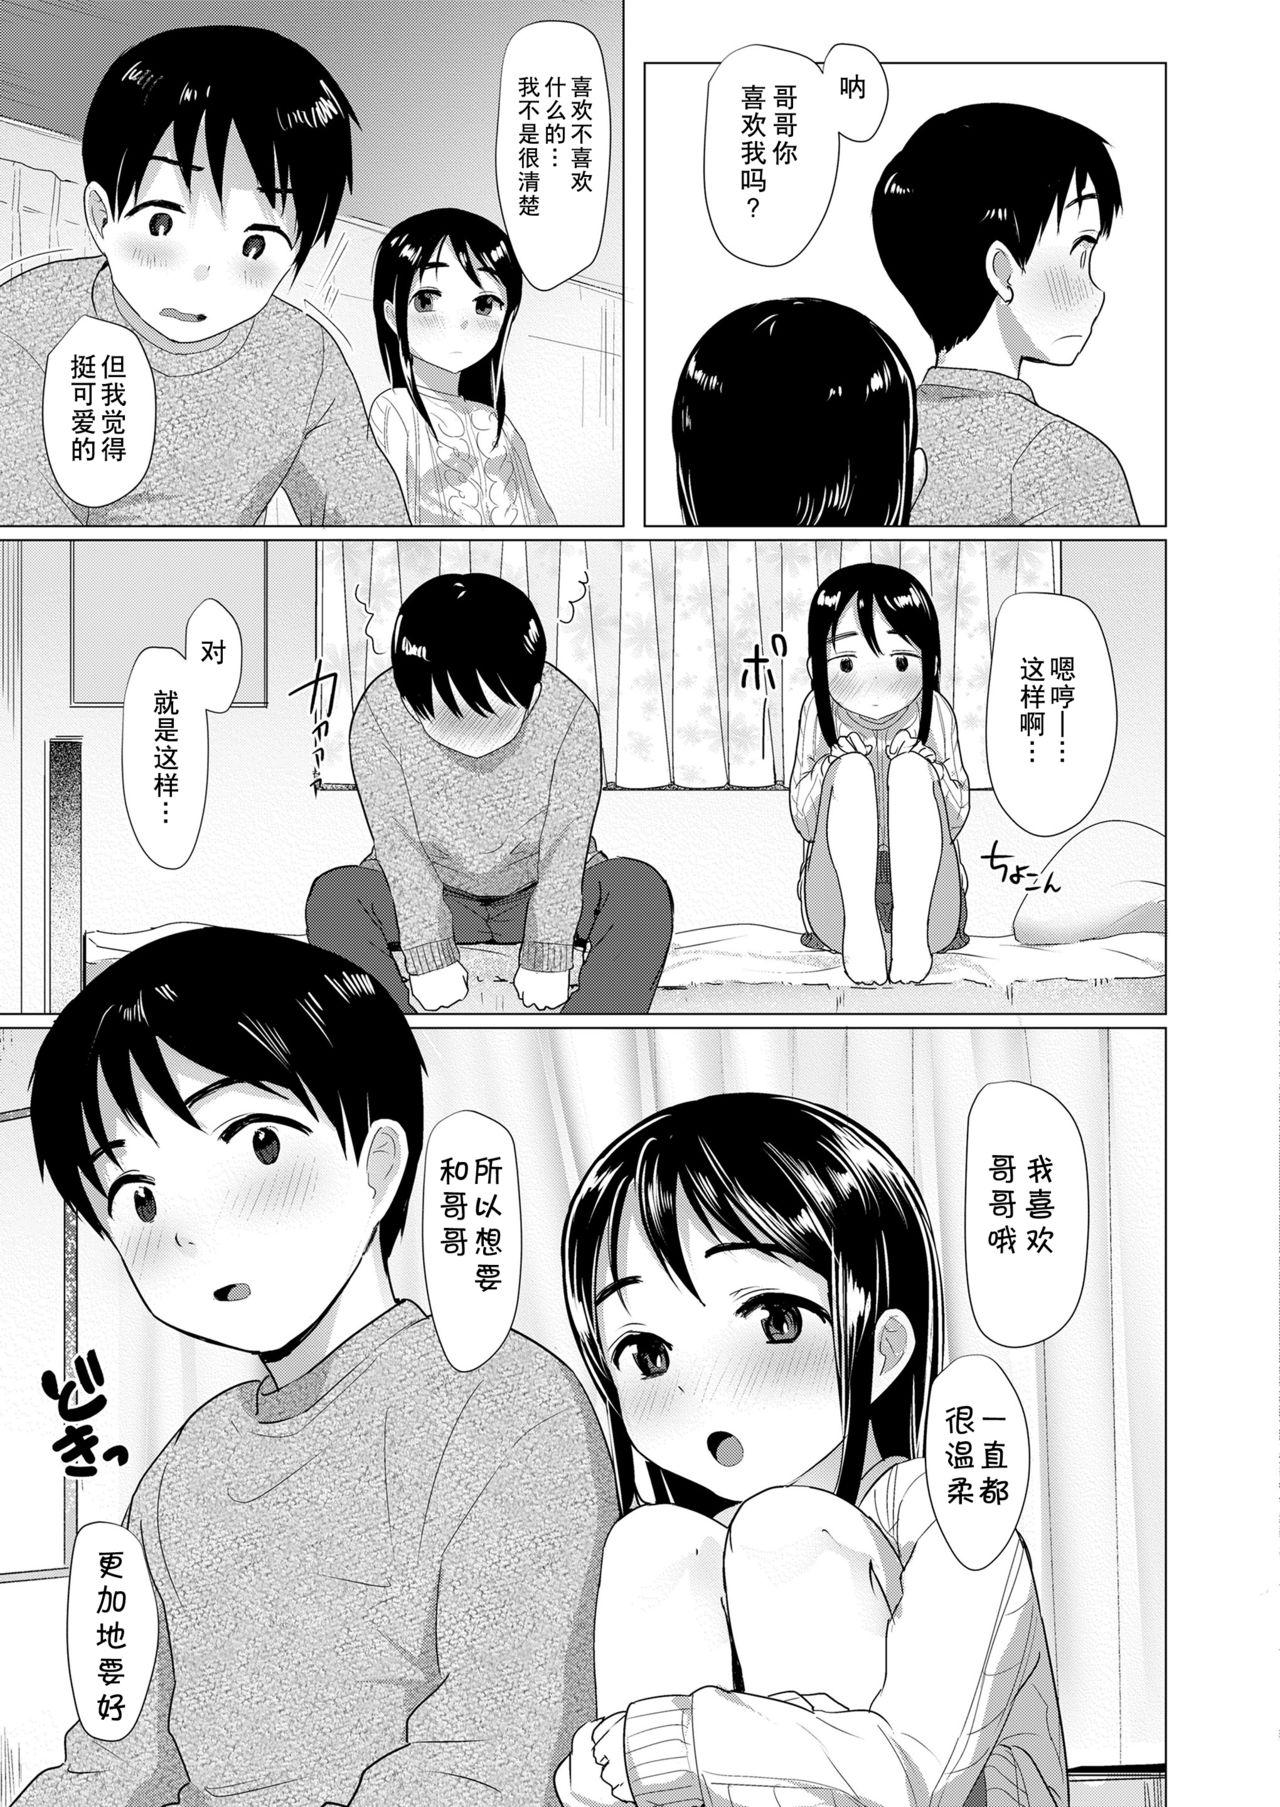 Similar Brothers and Sisters (COMICLO 2021) Chinese translation DL version (25 pages)-第1章-图片120